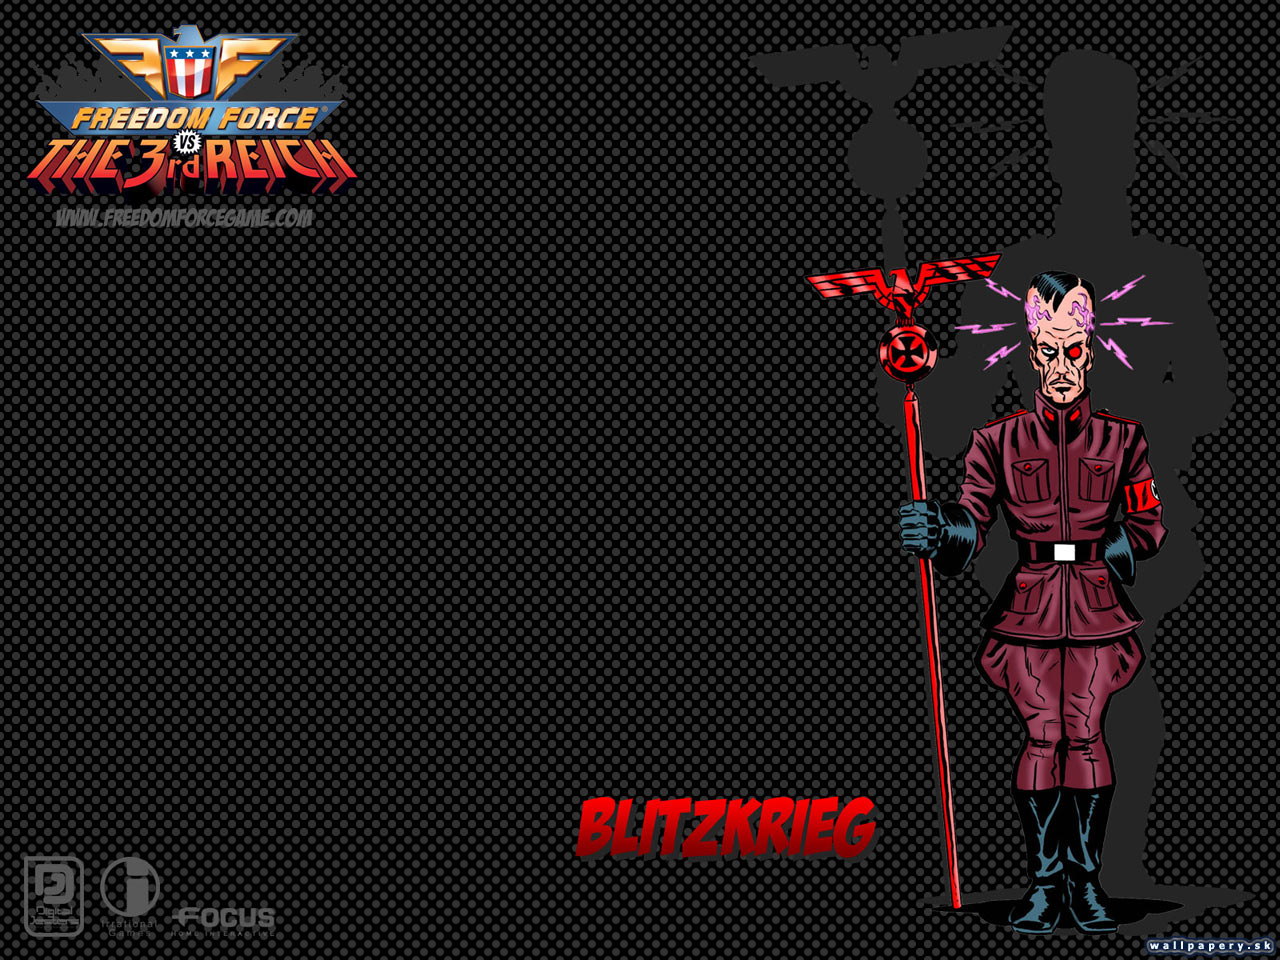 Freedom Force vs. Third Reich - wallpaper 4